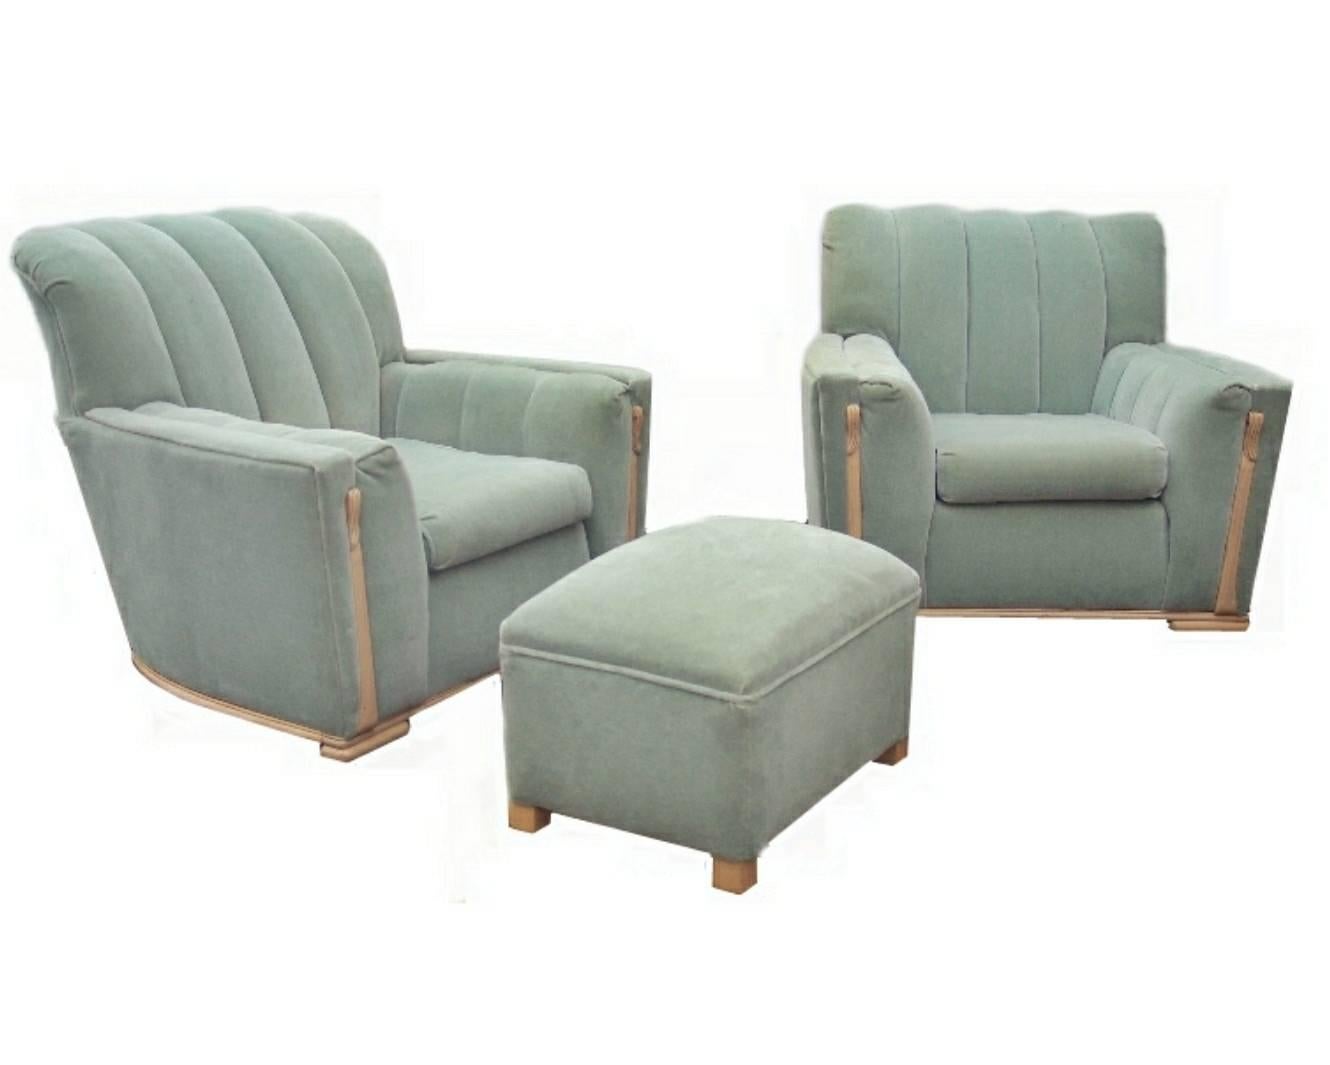 Other Pair or Art Deco Streamline Club Wood Trim Lounge Chairs and Ottoman